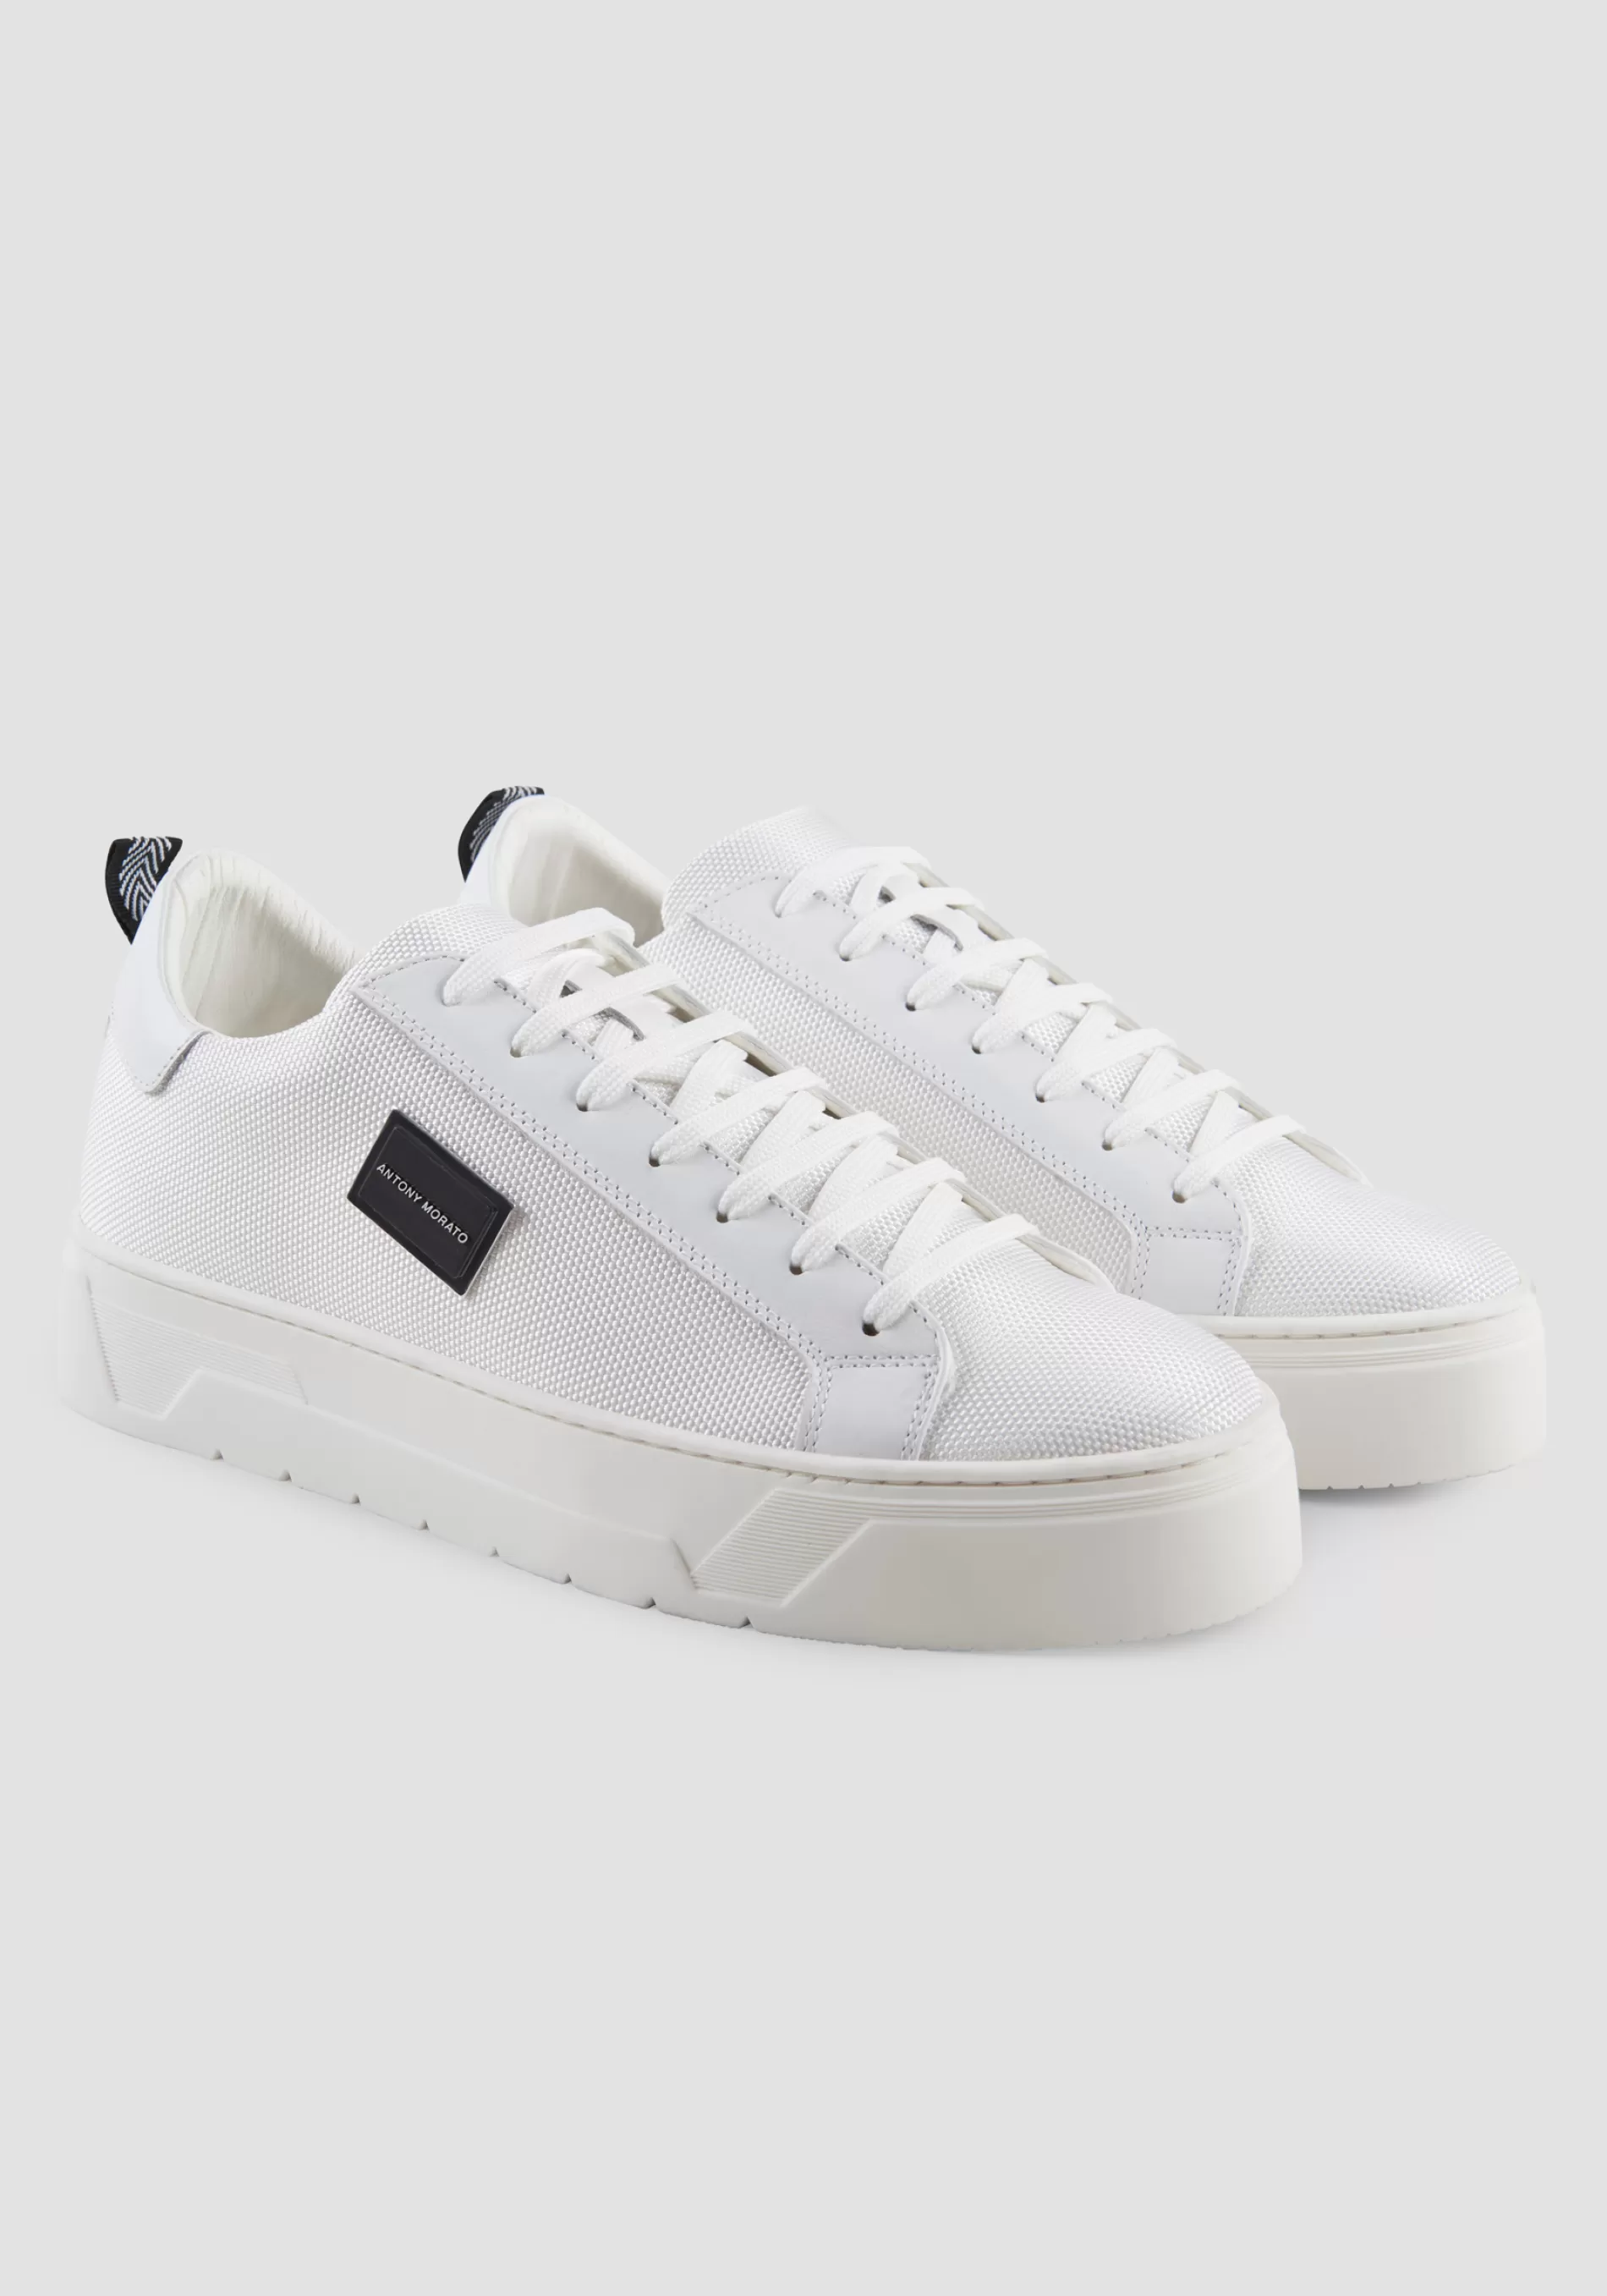 Best Sale "METAL BOLD" LOW-TOP SNEAKERS IN NYLON AND LEATHER Sneakers